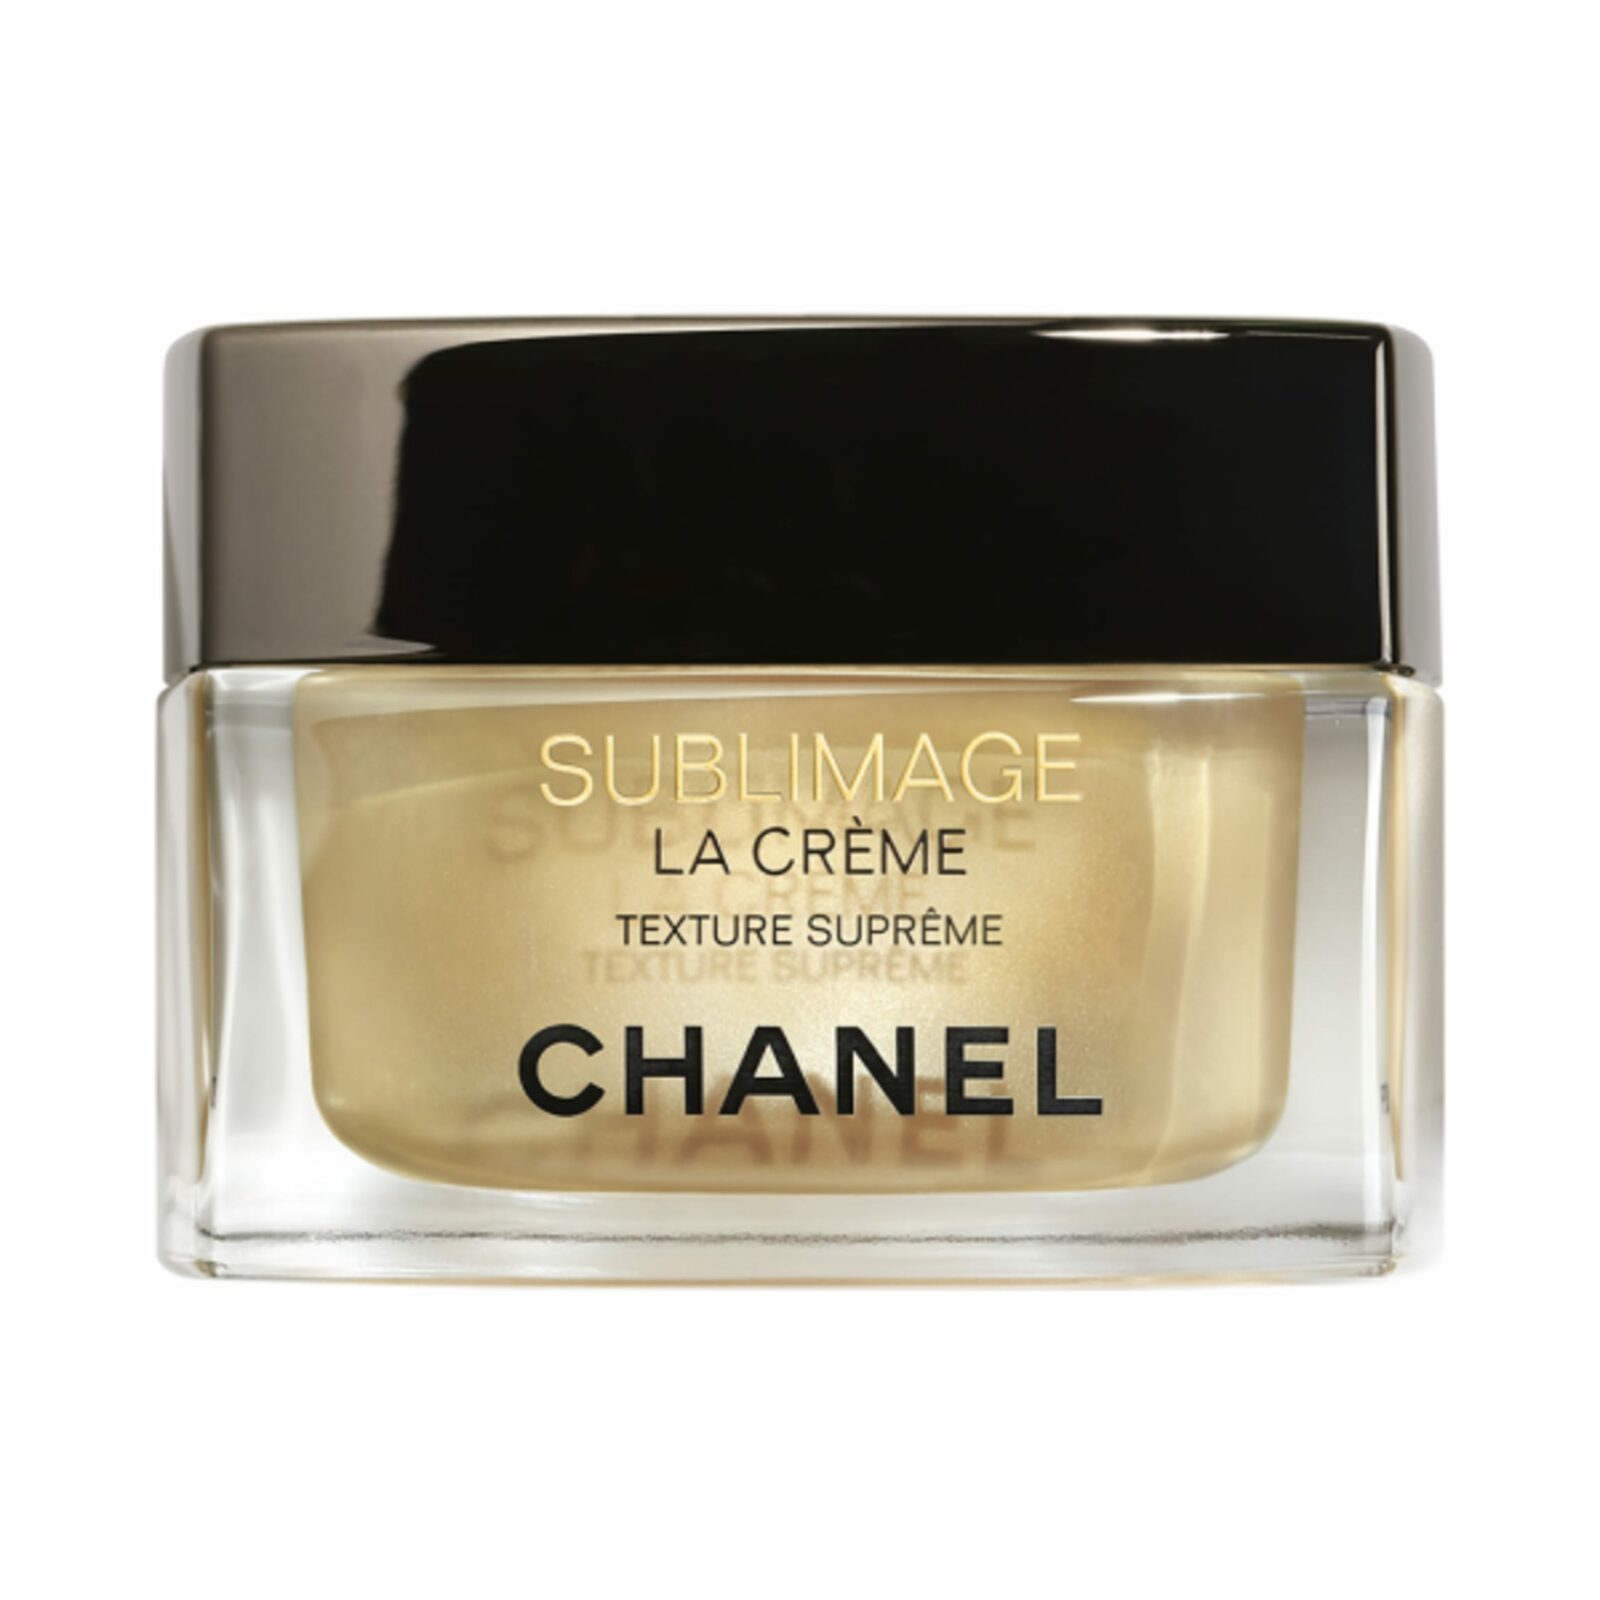 Chanel Skincare Review – 21 Best-Selling Chanel Products